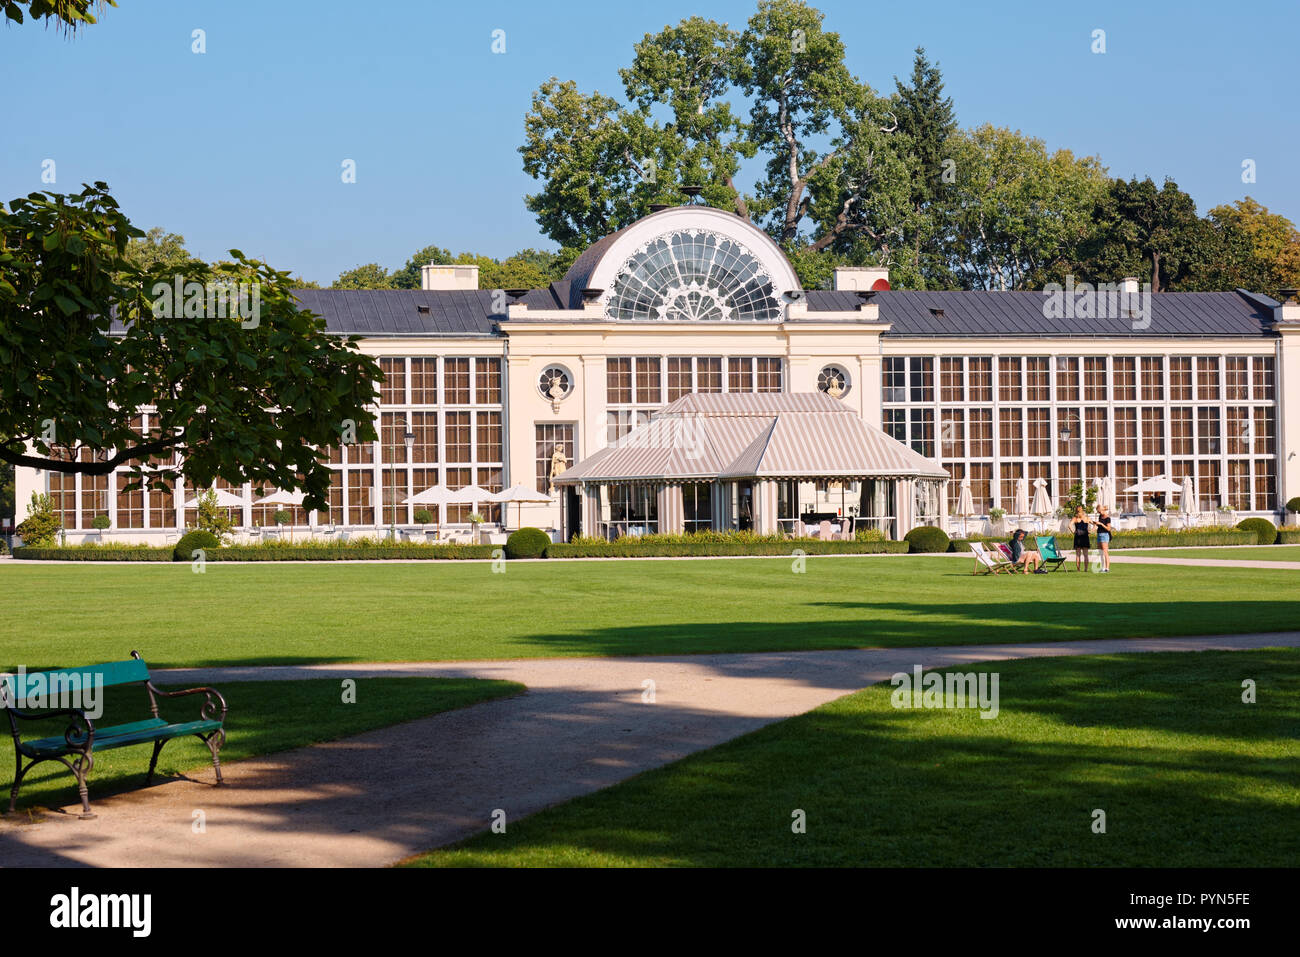 Warsaw, Poland - September 21, 2018: People resting at New Orangery in Lazienki Krolewskie park. Built in 1861 for the orange trees, it now houses the Stock Photo